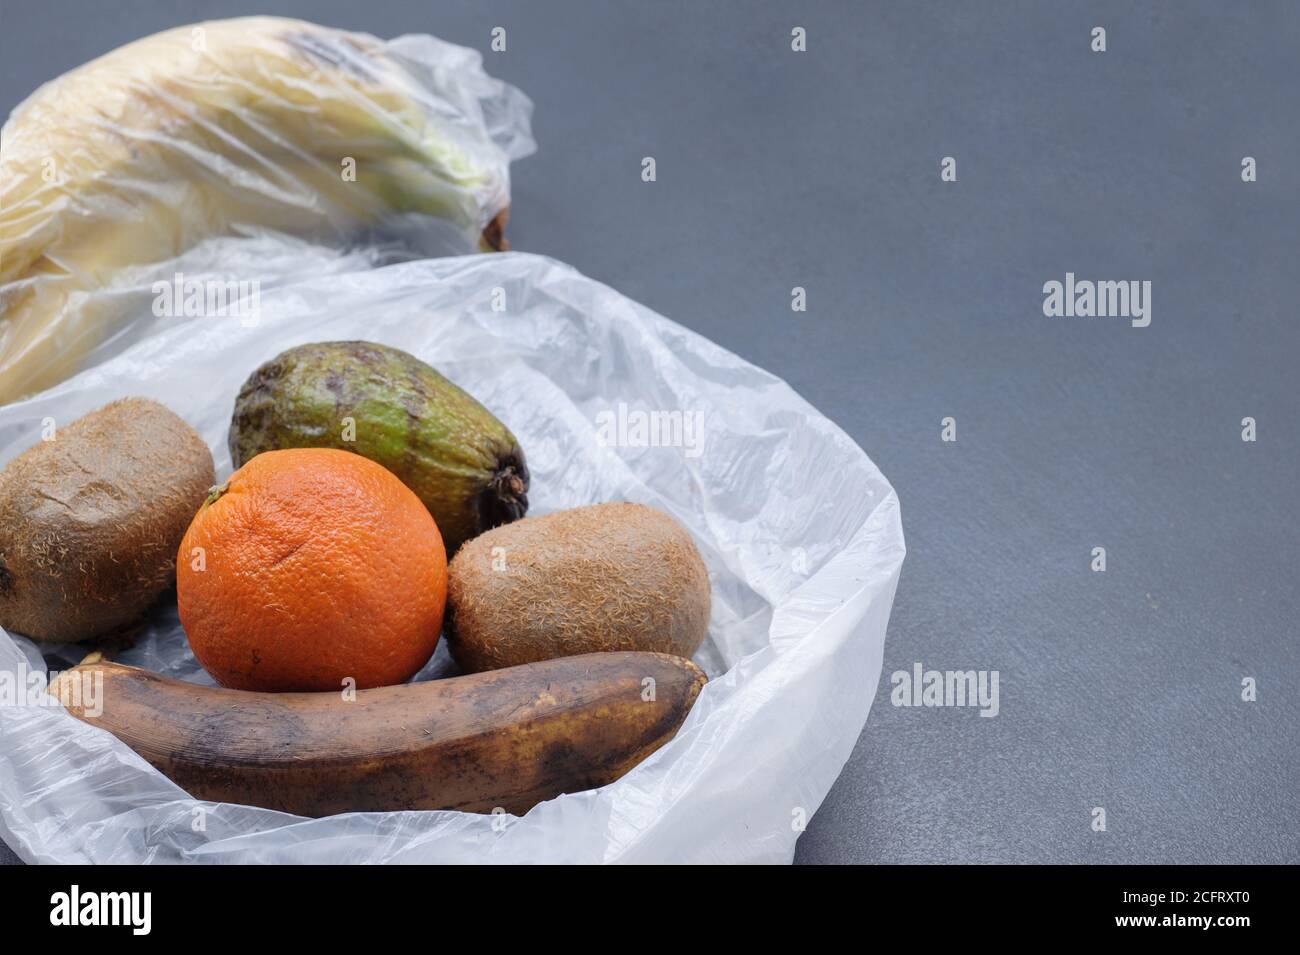 Spoiled fruits in the plastic bag on the gray background. Garbage dump rotten food.  Zero waste  concept. Image with copy space,horizontal. Stock Photo